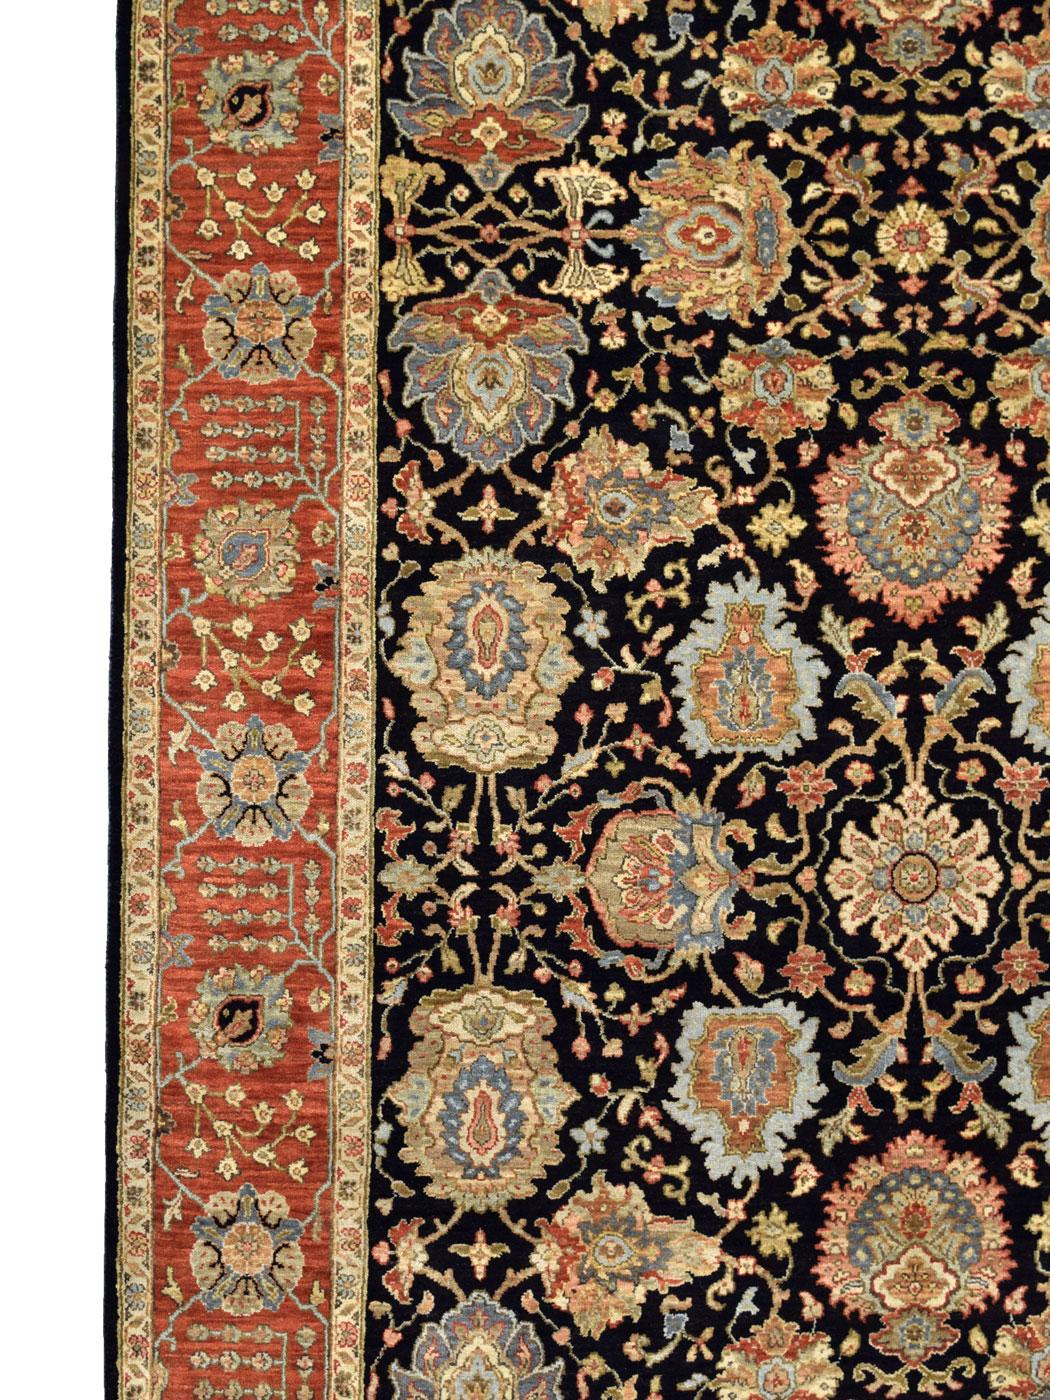 Hand-Knotted Persian Agra Carpet, Red, Orange, and Black Wool, 6' x 9' For Sale 1